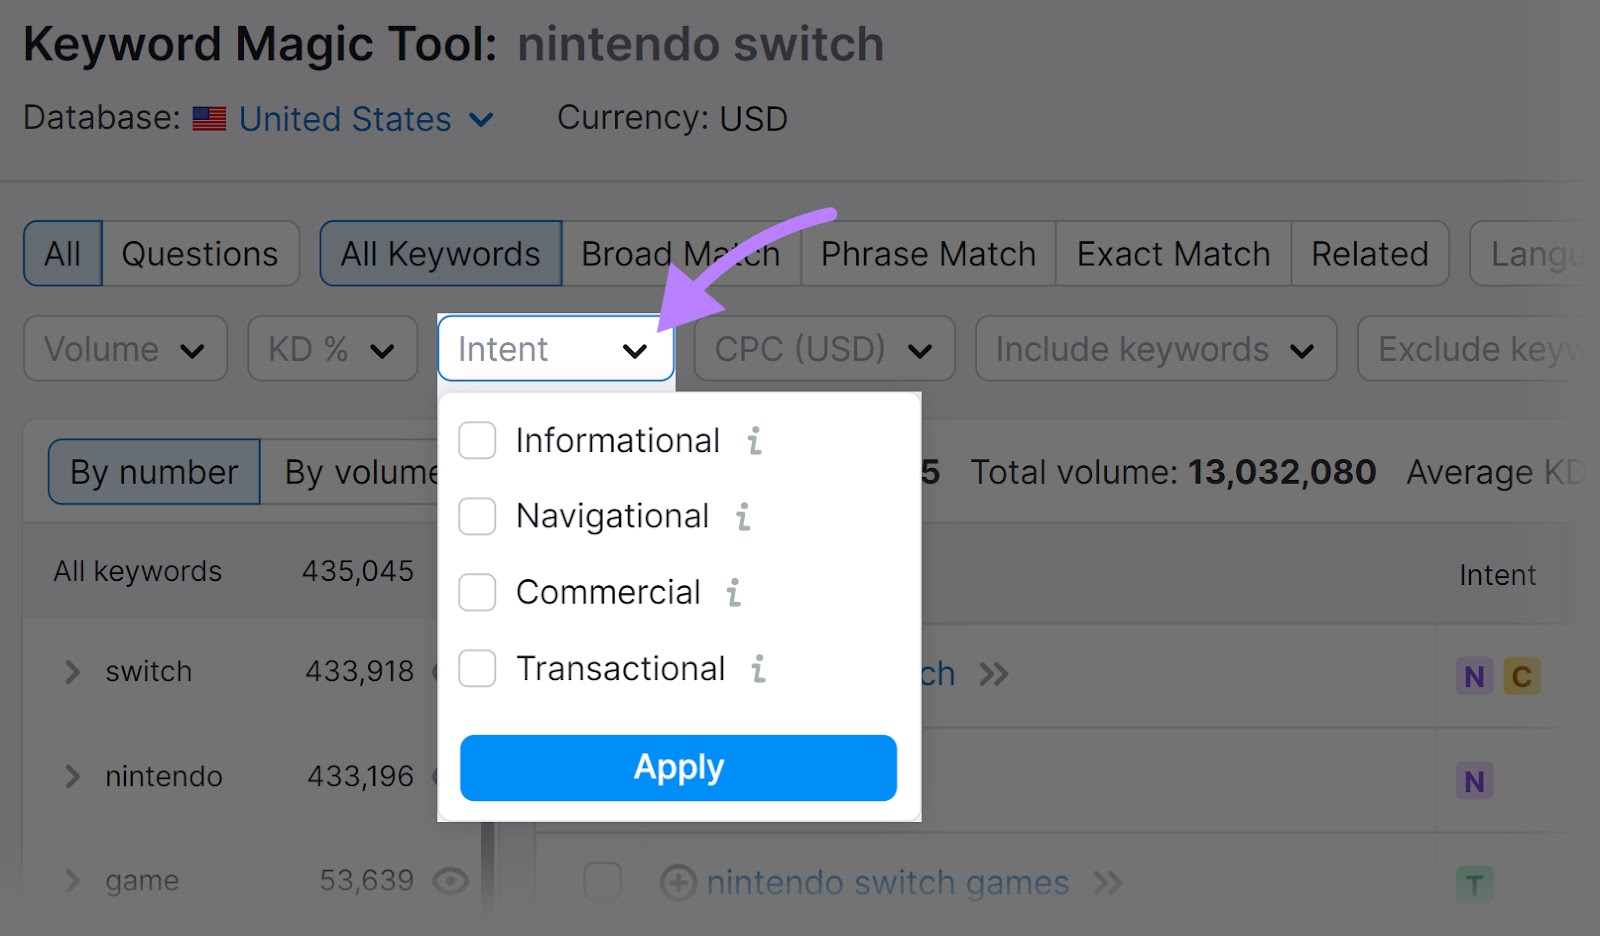 "Intent" drop-down menu with "Informational," "Navigational," "Commercial" and "Transactional" options